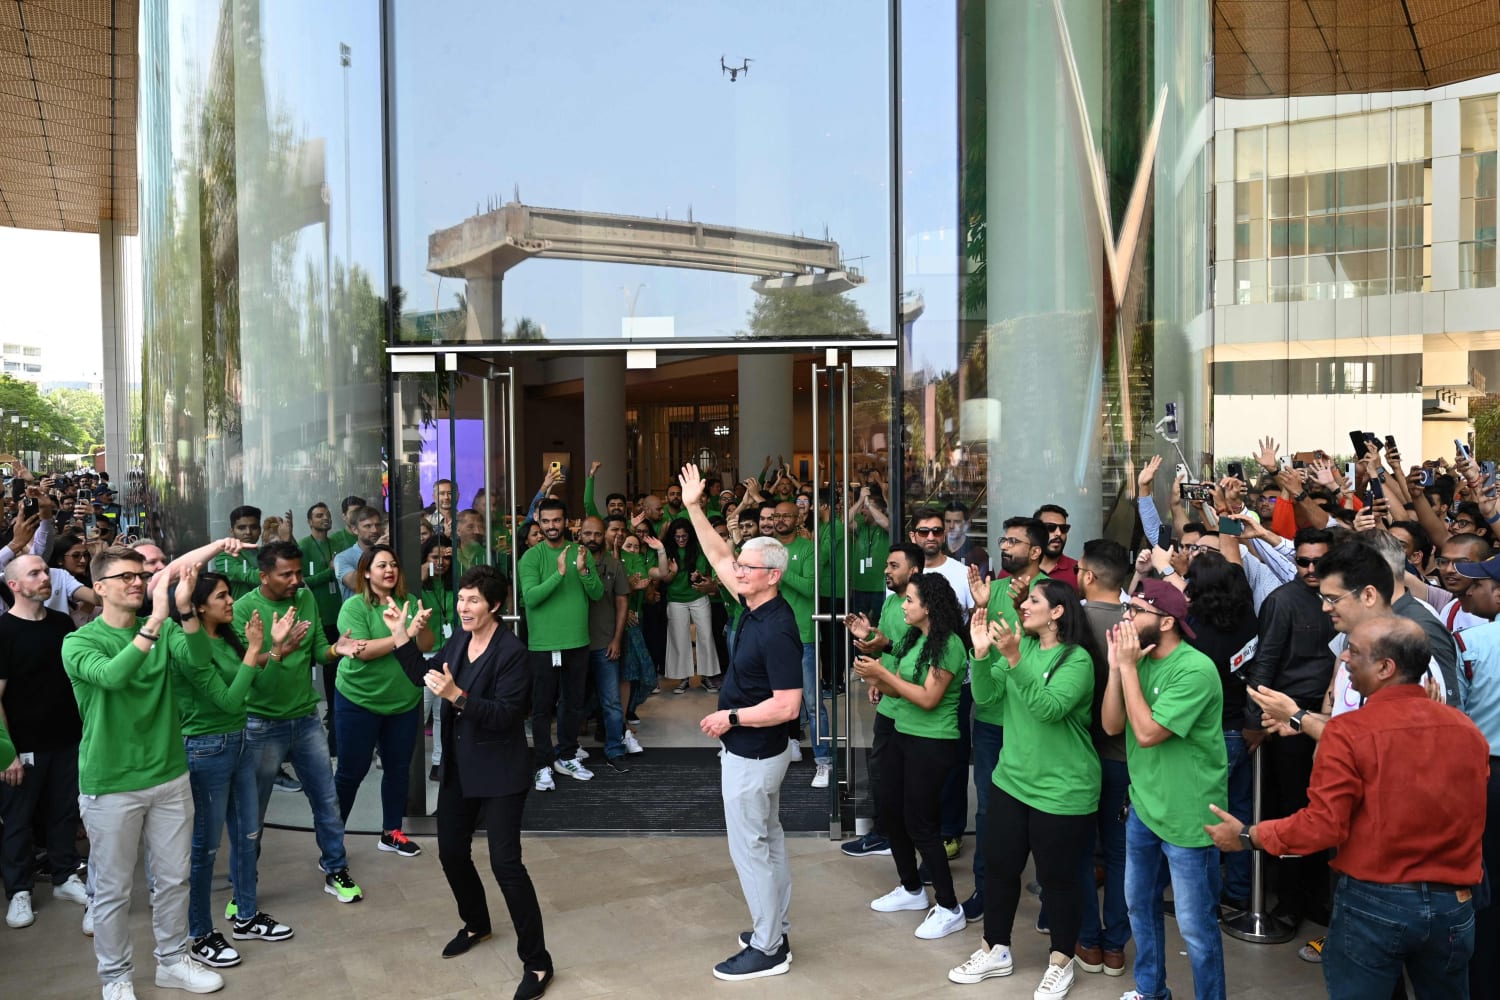 First Look: Apple store turns up the heat in Miami